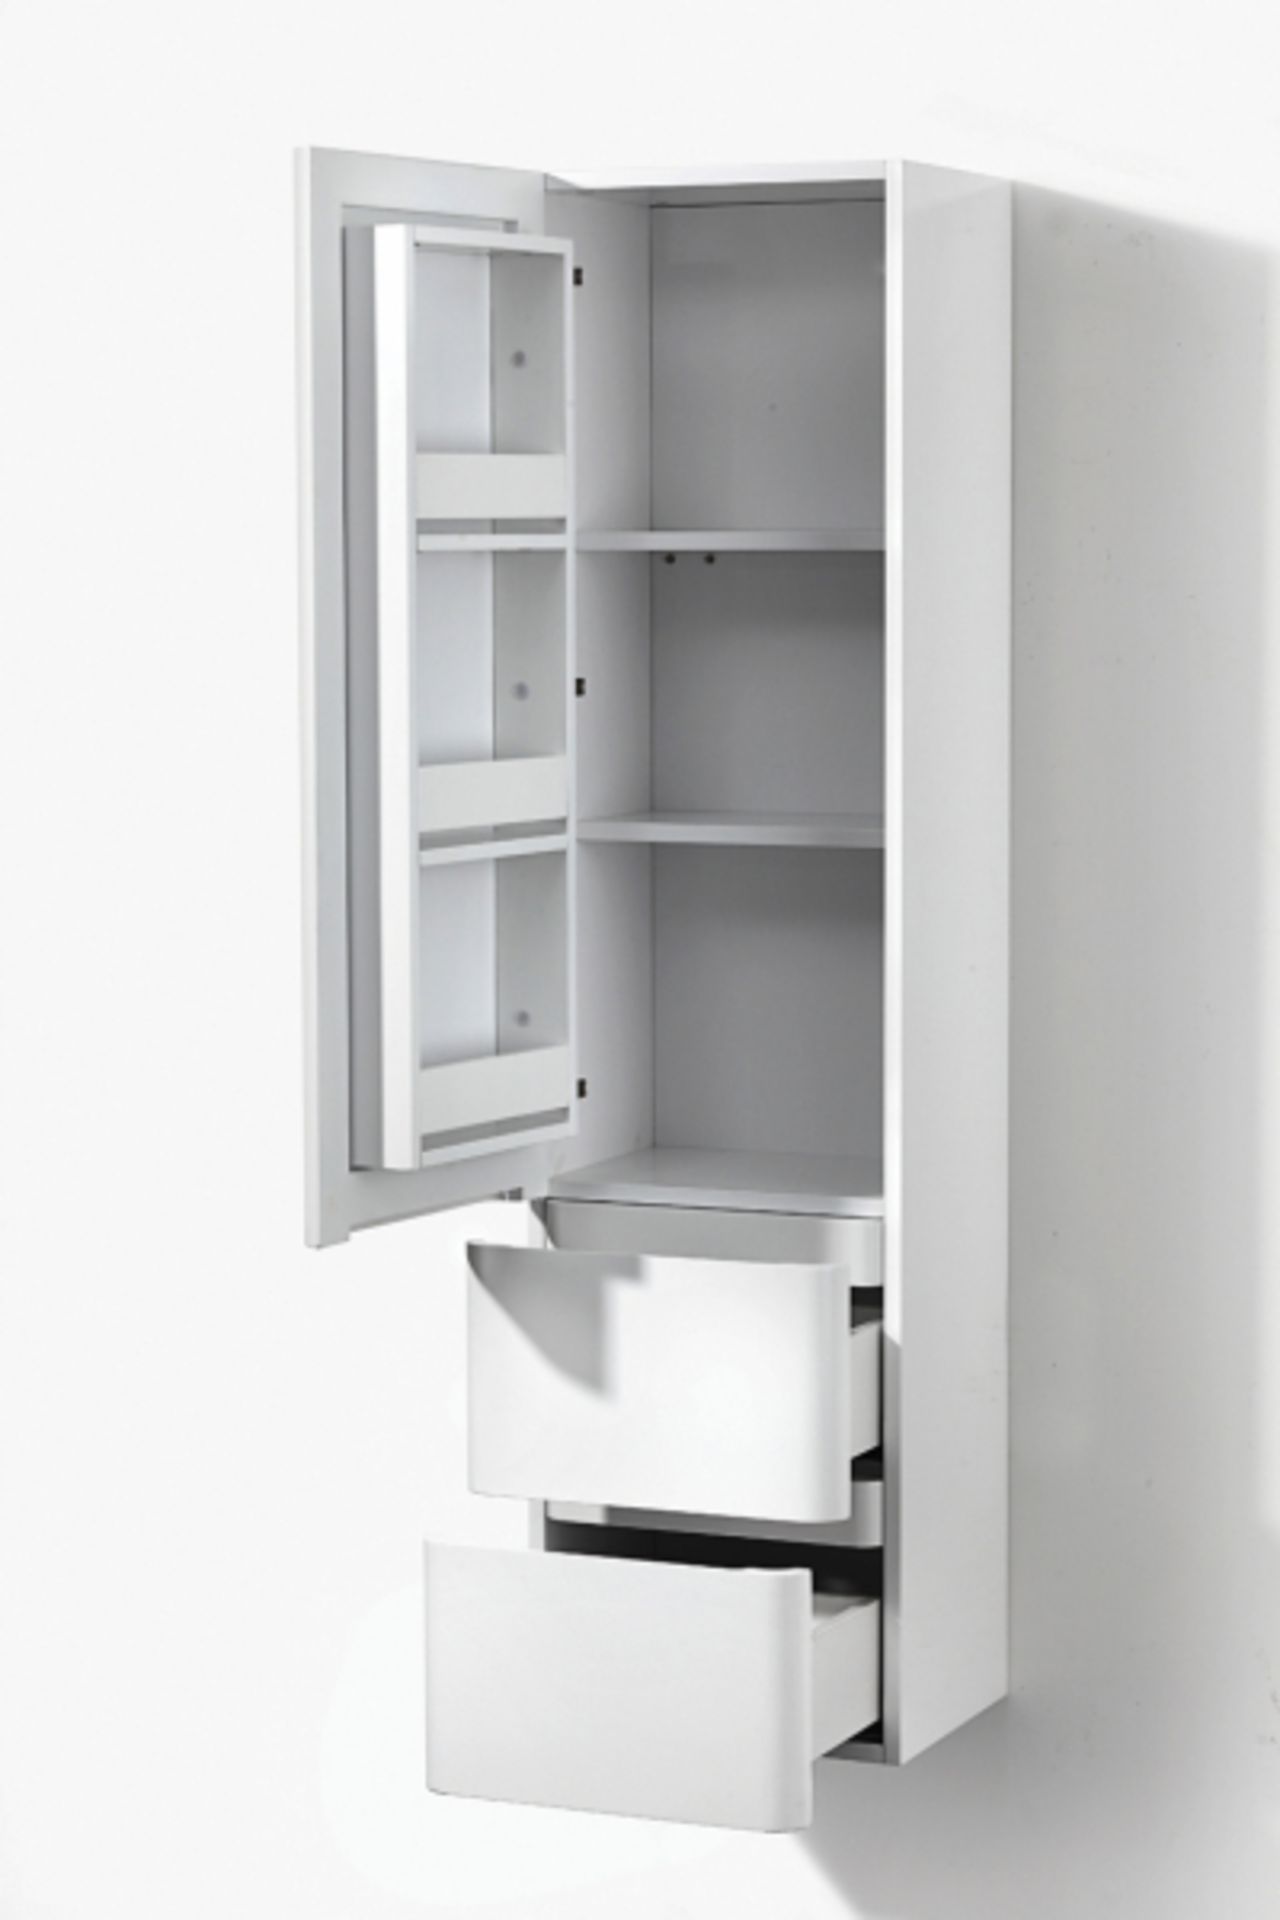 1 x White Gloss Storage Cabinet 155 - A-Grade - Ref:ASC41-155 - CL170 - Location: Nottingham NG2 - R - Image 2 of 3